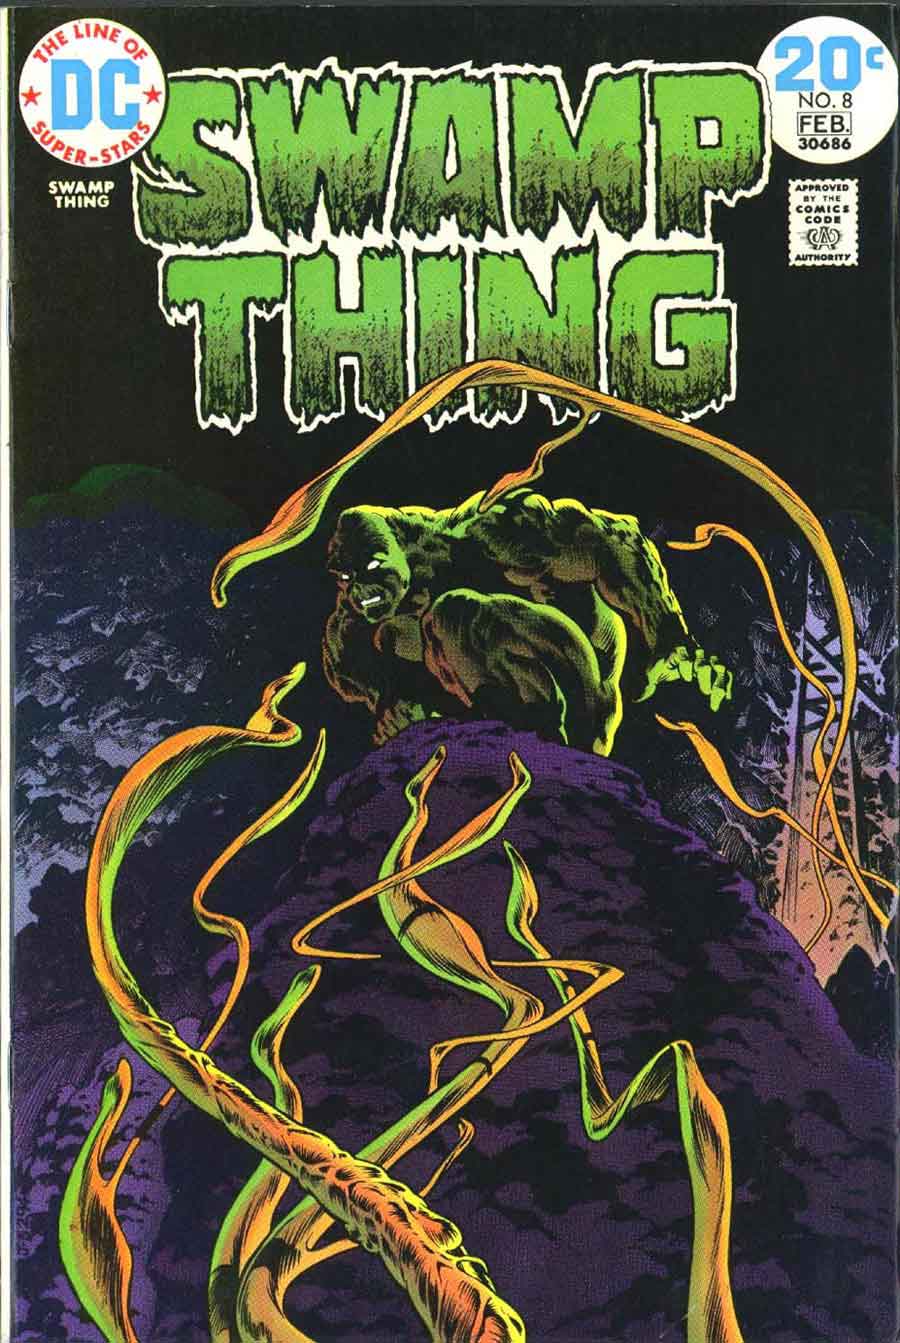 Swamp Thing #8 bronze age 1970s dc comic book cover art by Bernie Wrightson